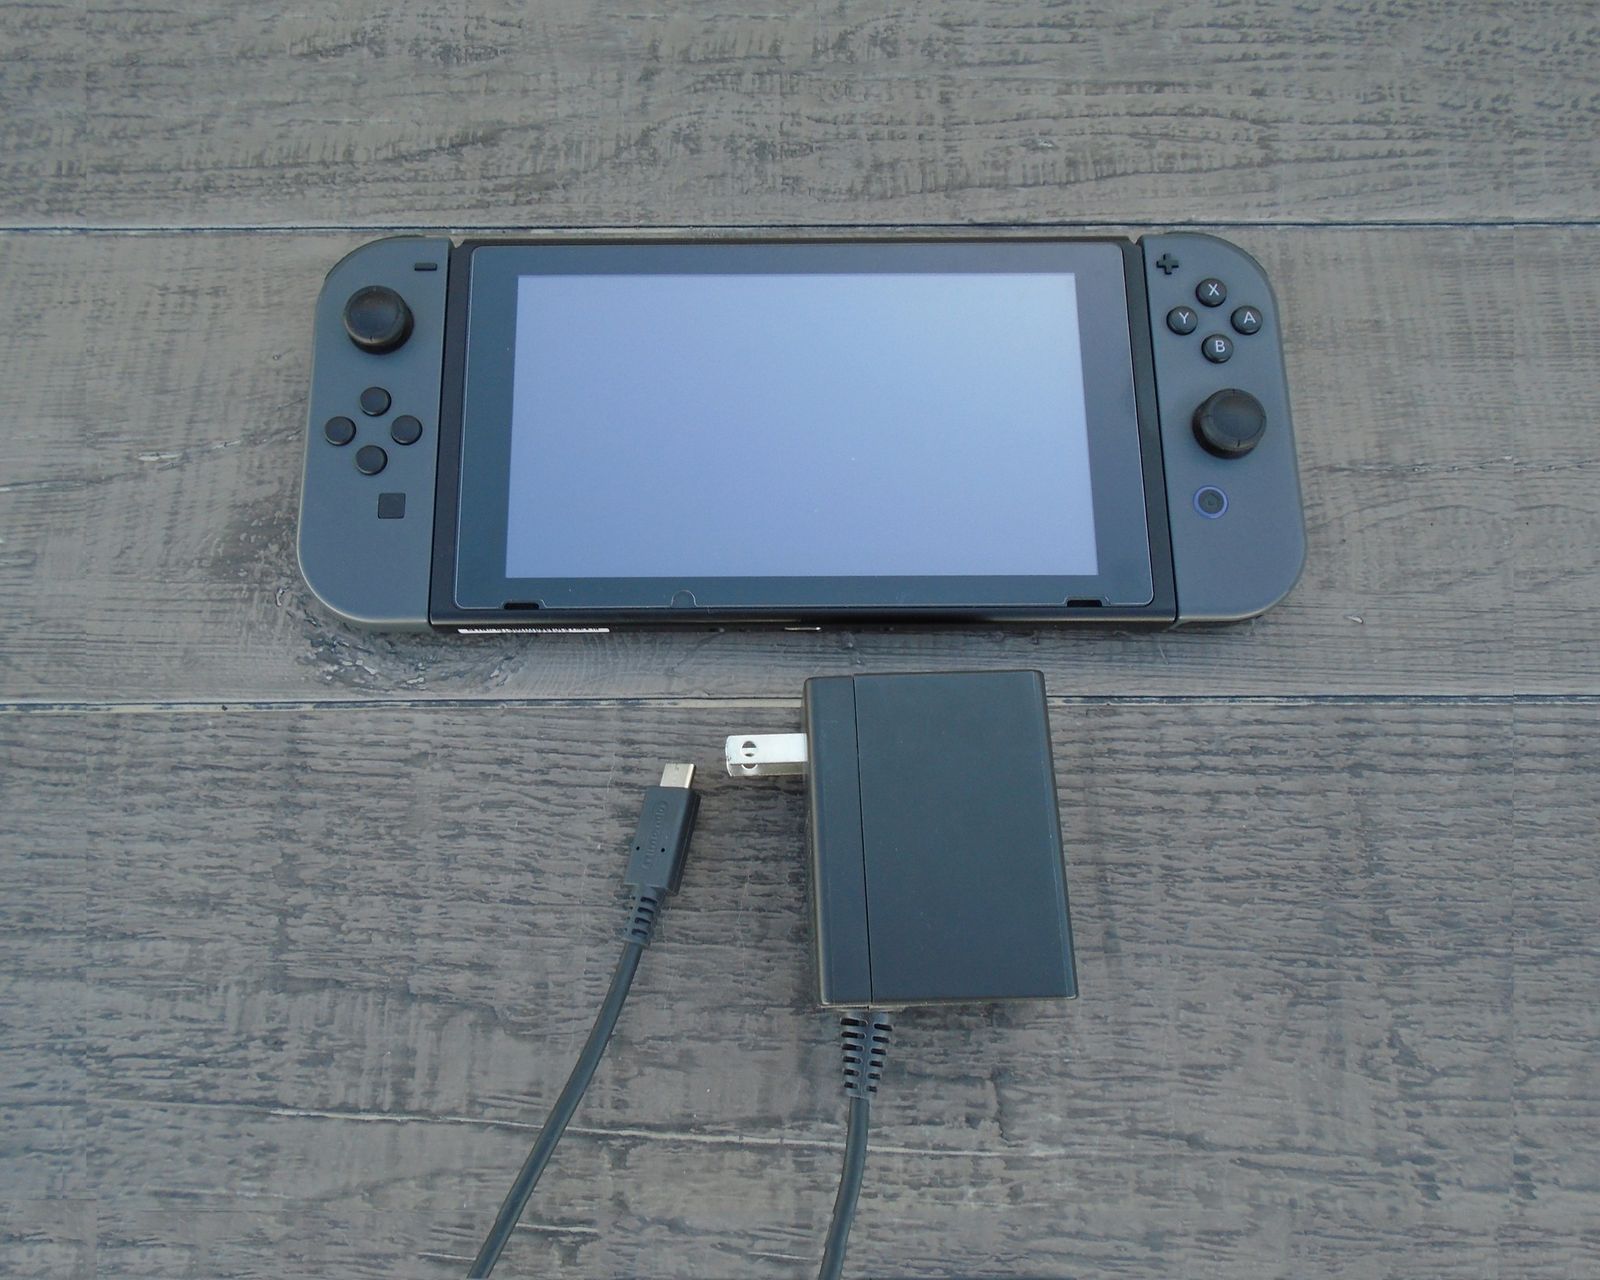 where to buy a nintendo switch charger